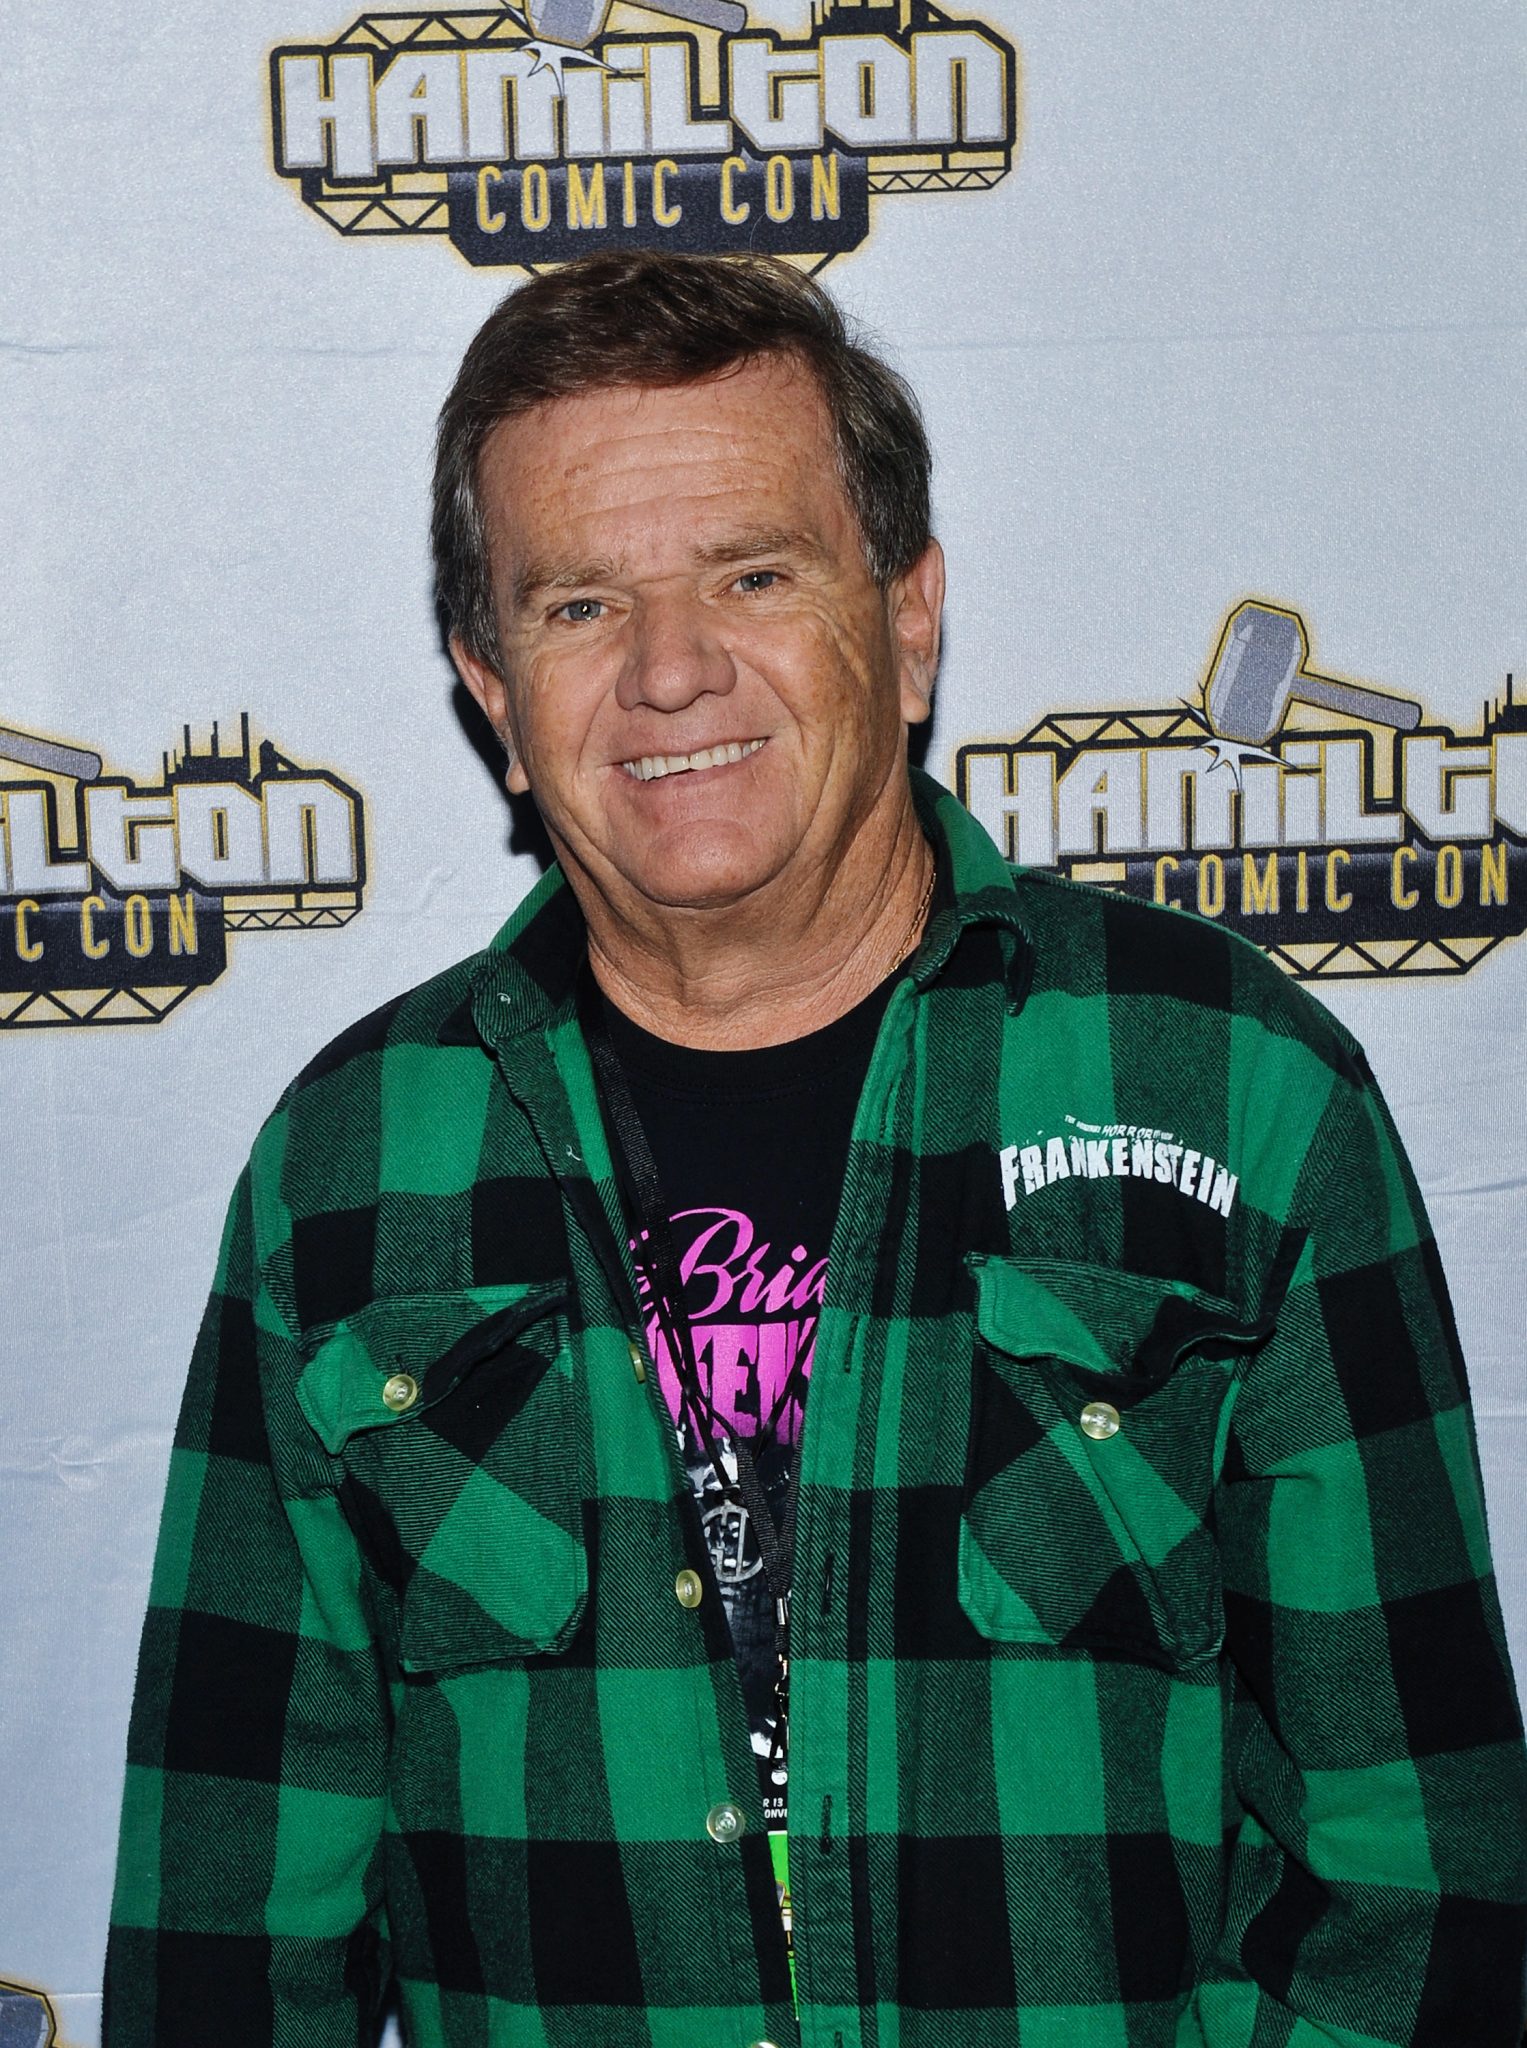 'Munsters' Star Butch Patrick Reacts To Herman Munster Scene In 2020